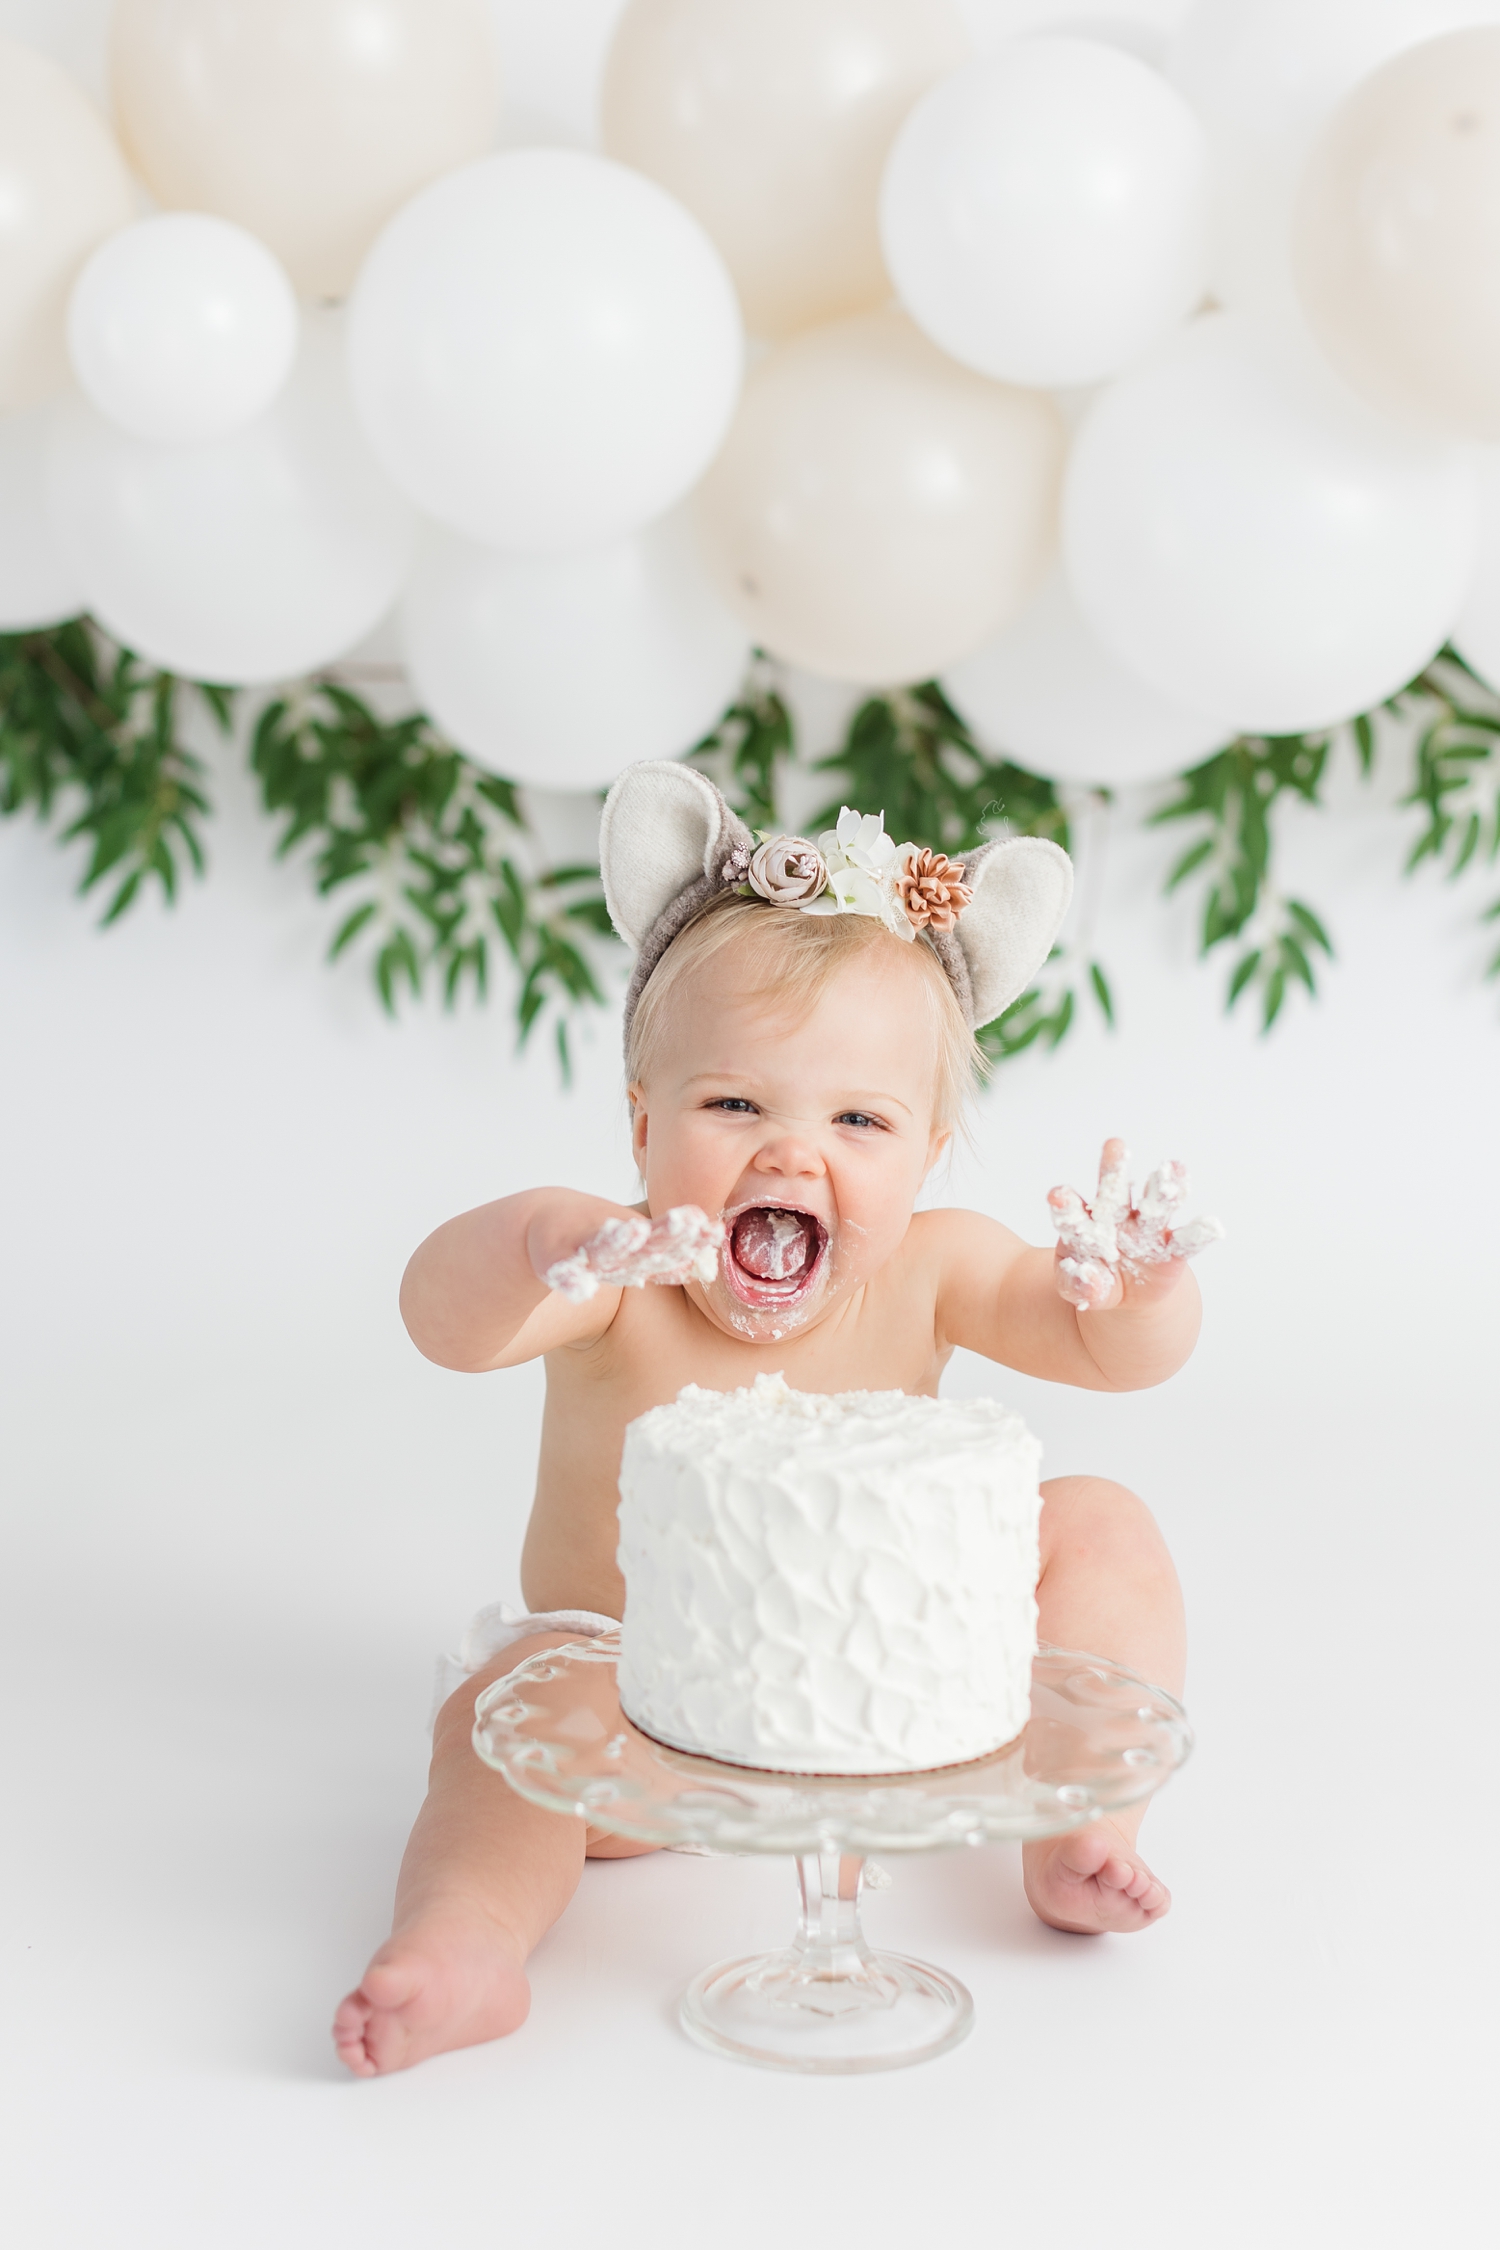 Baby Emersyn enjoys a white cake with a white balloon garland background to celebrate her first birthday | CB Studio